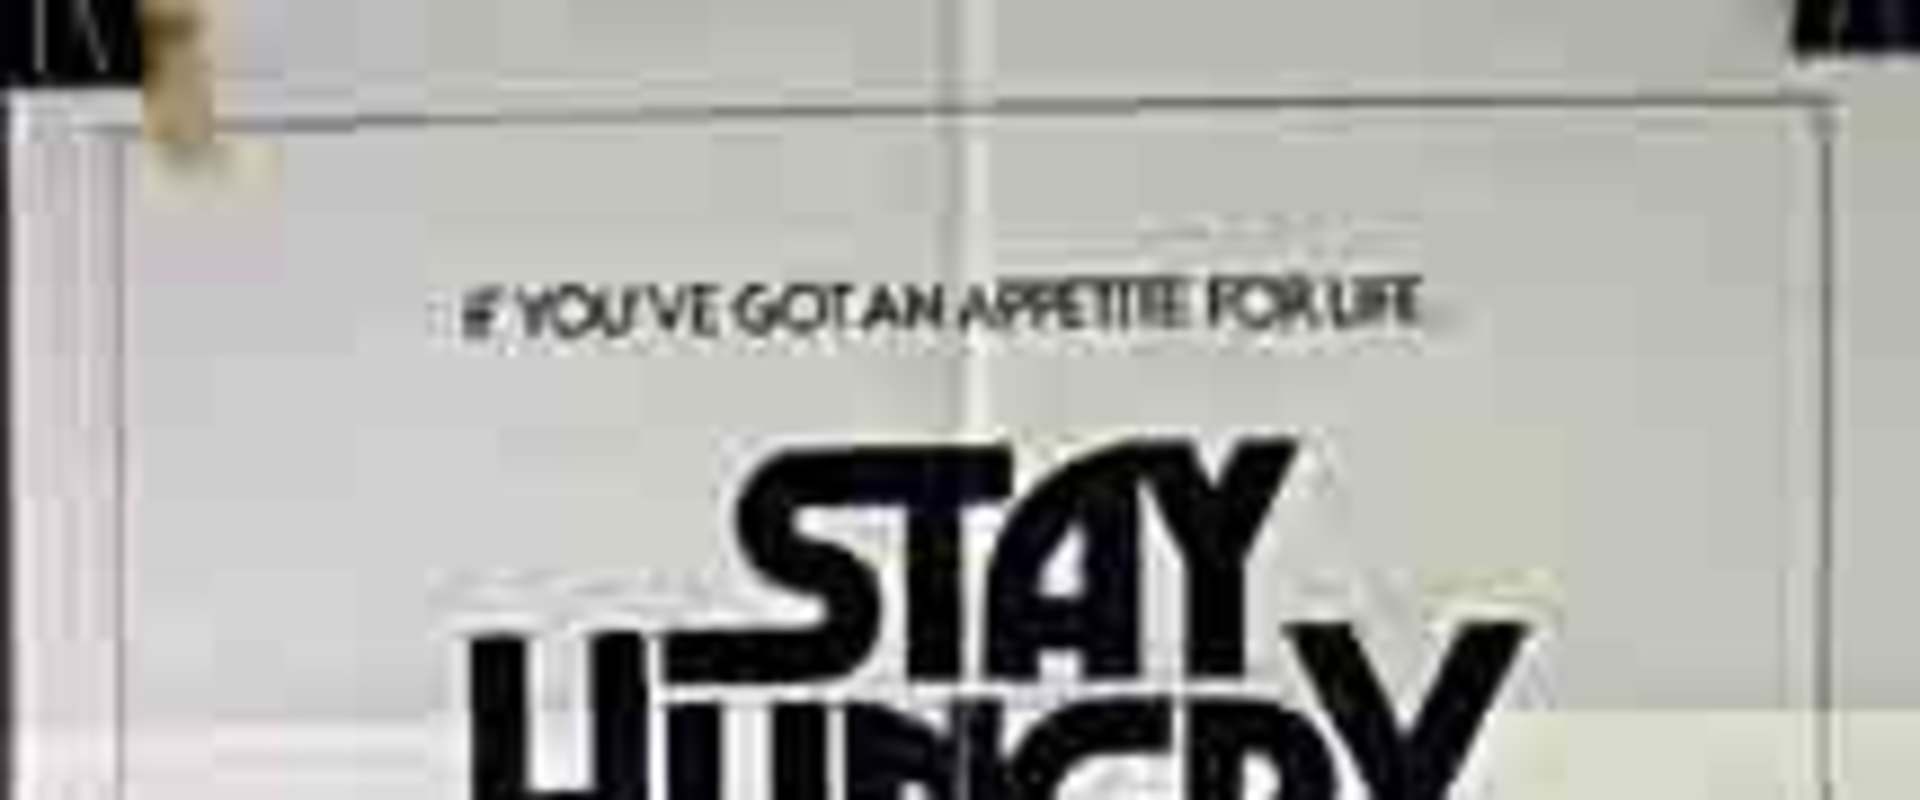 Stay Hungry background 1